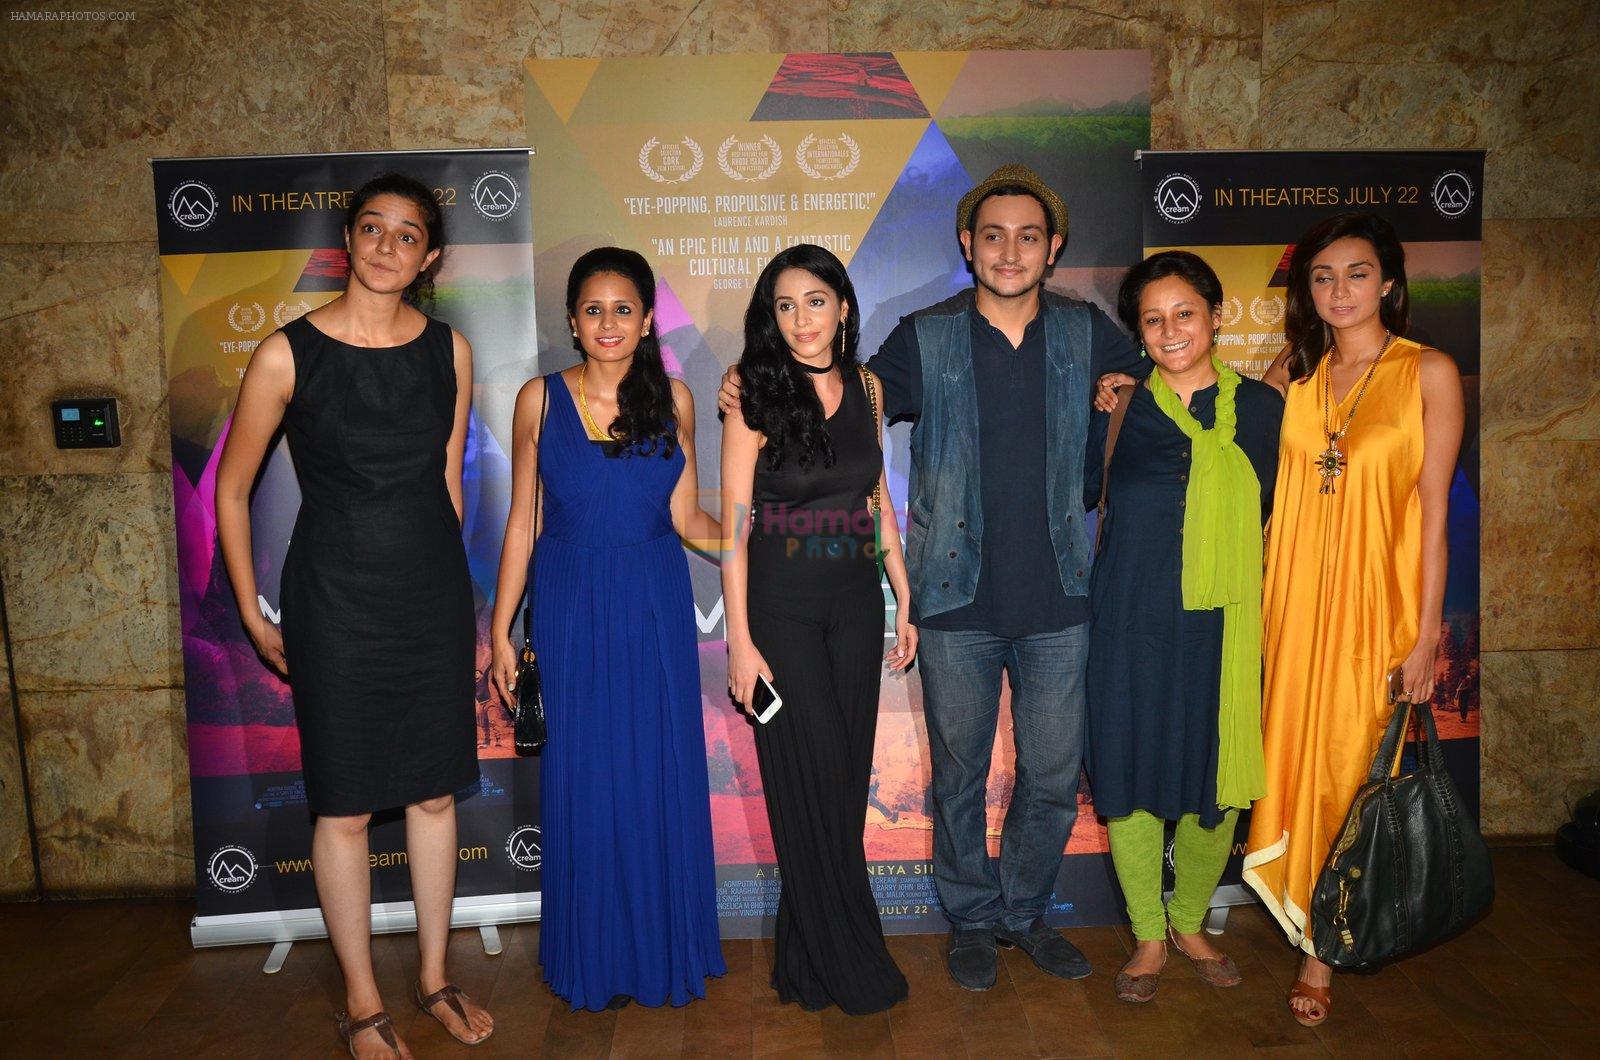 Ira Dubey at Imaad and Ira Dubey's film MCream on 13th July 2016